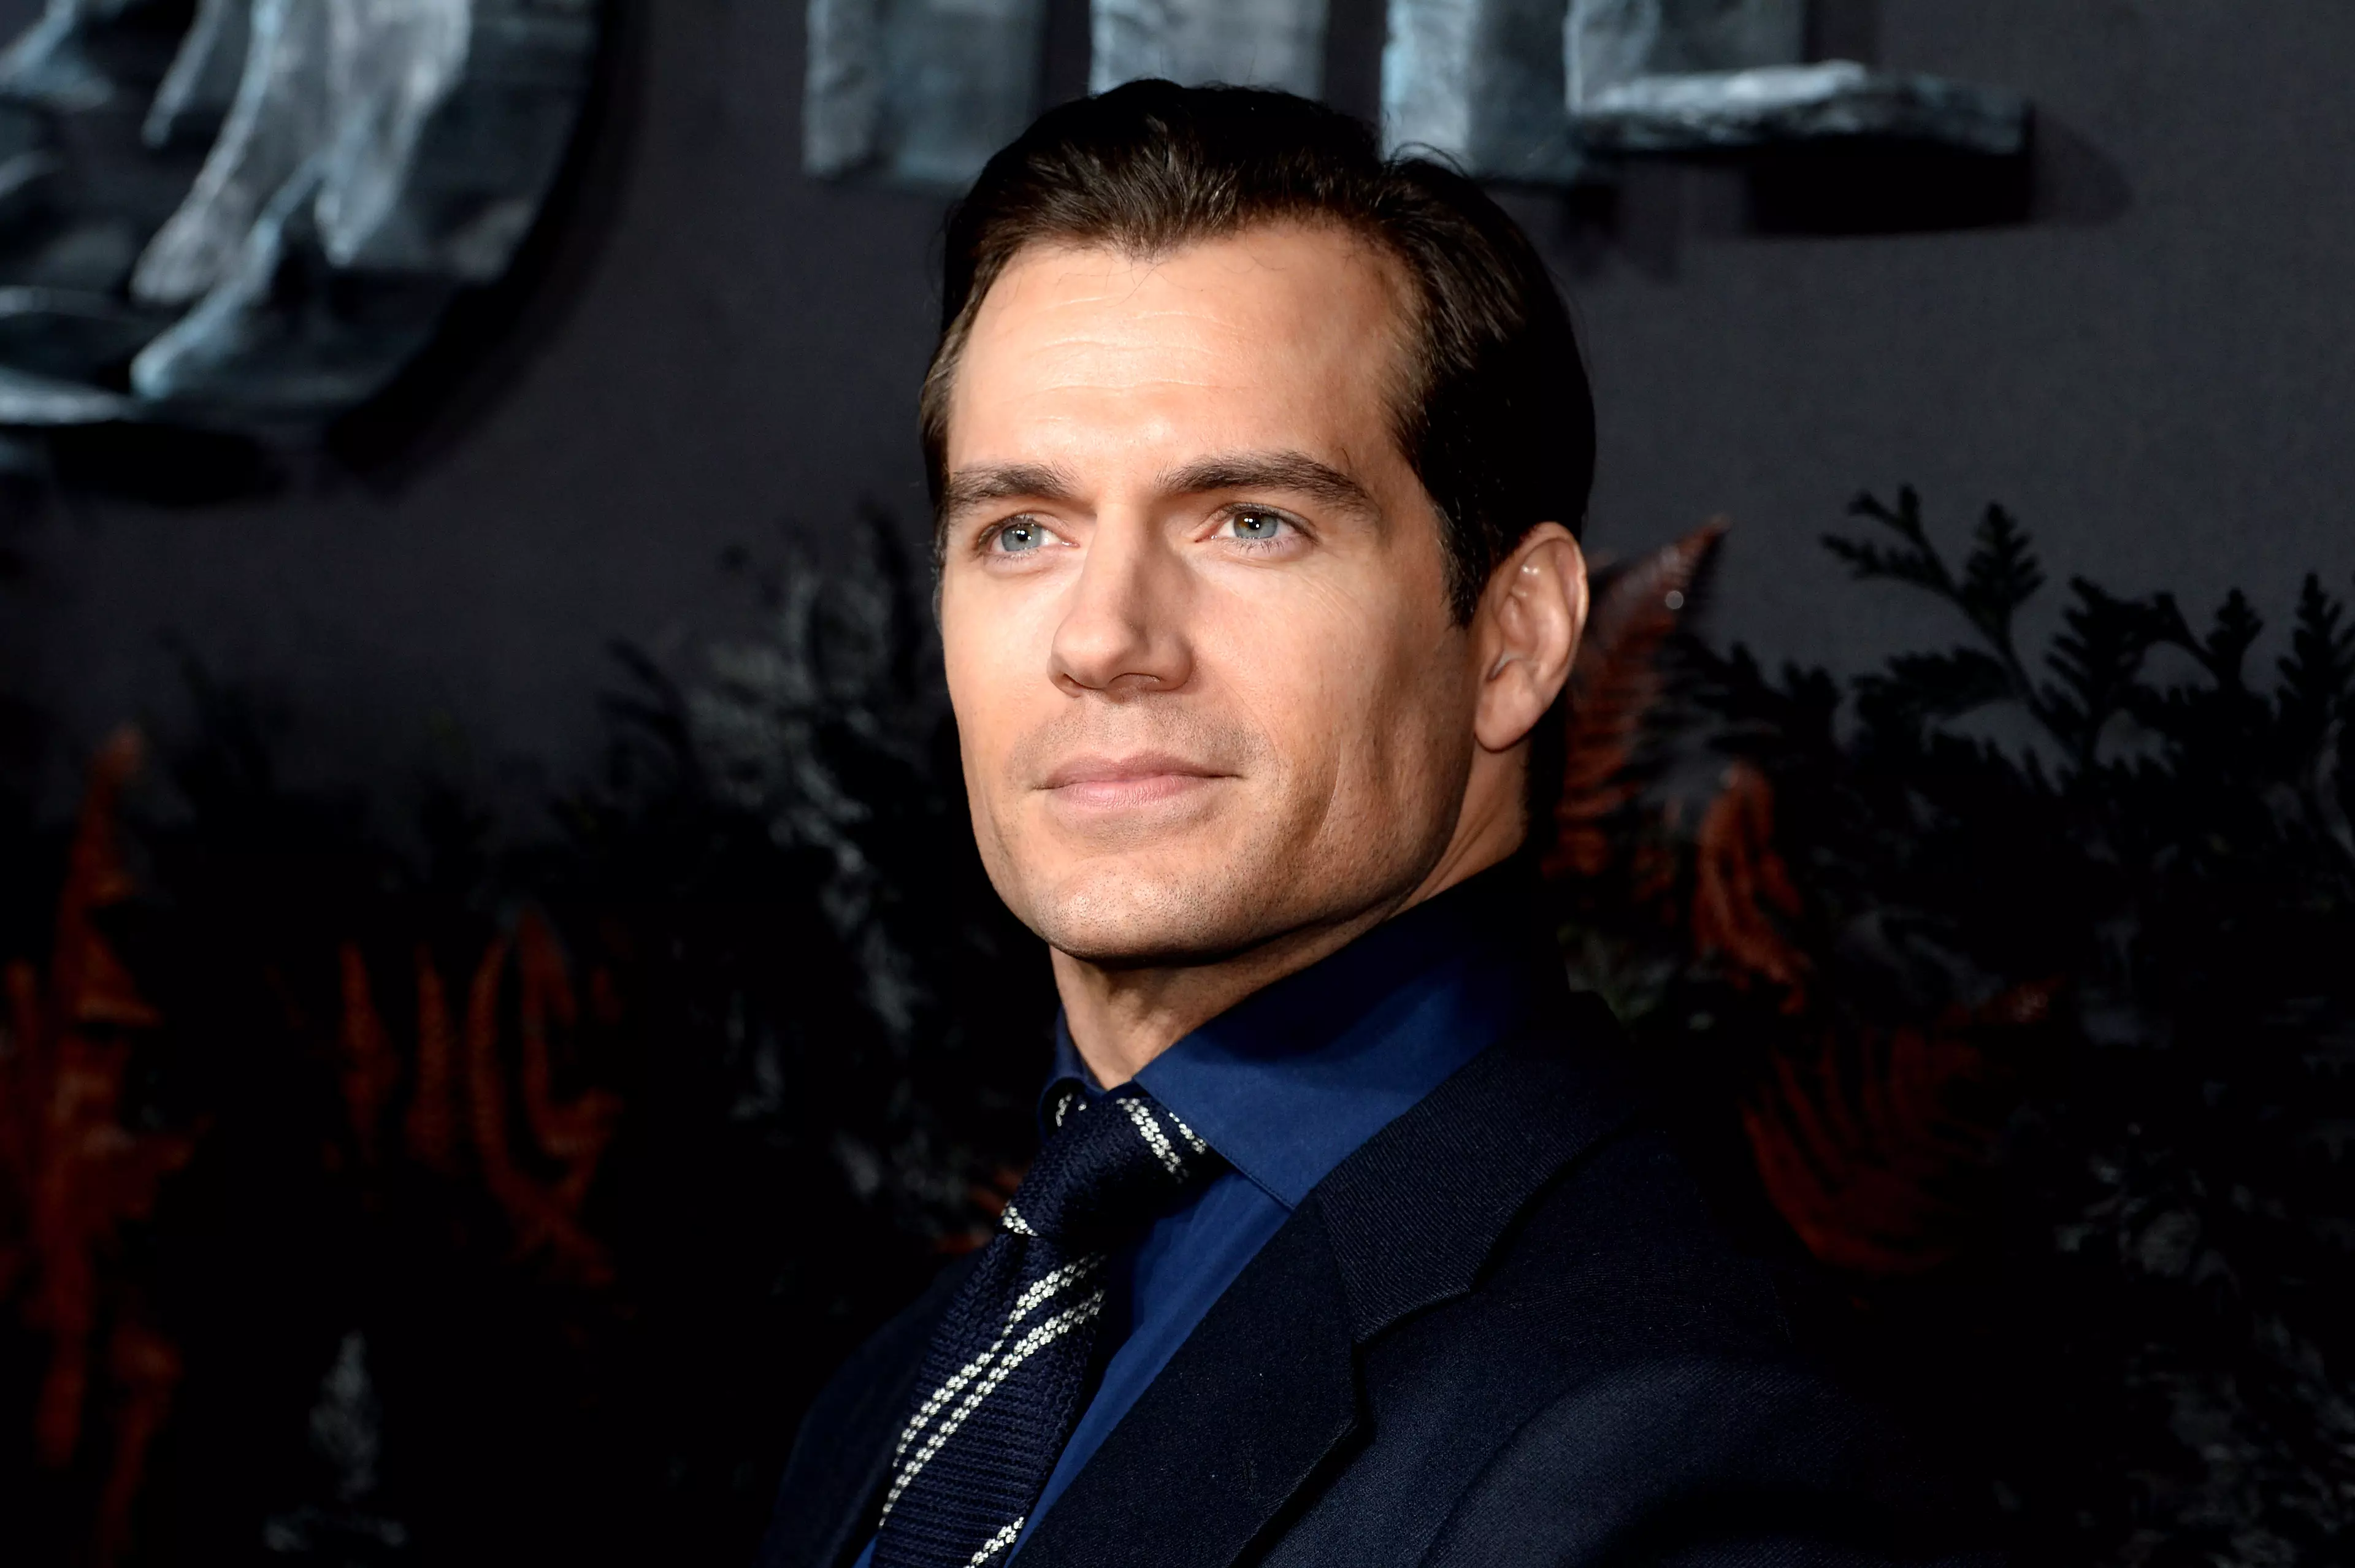 The Witcher's Henry Cavill is open to playing the next James Bond. (